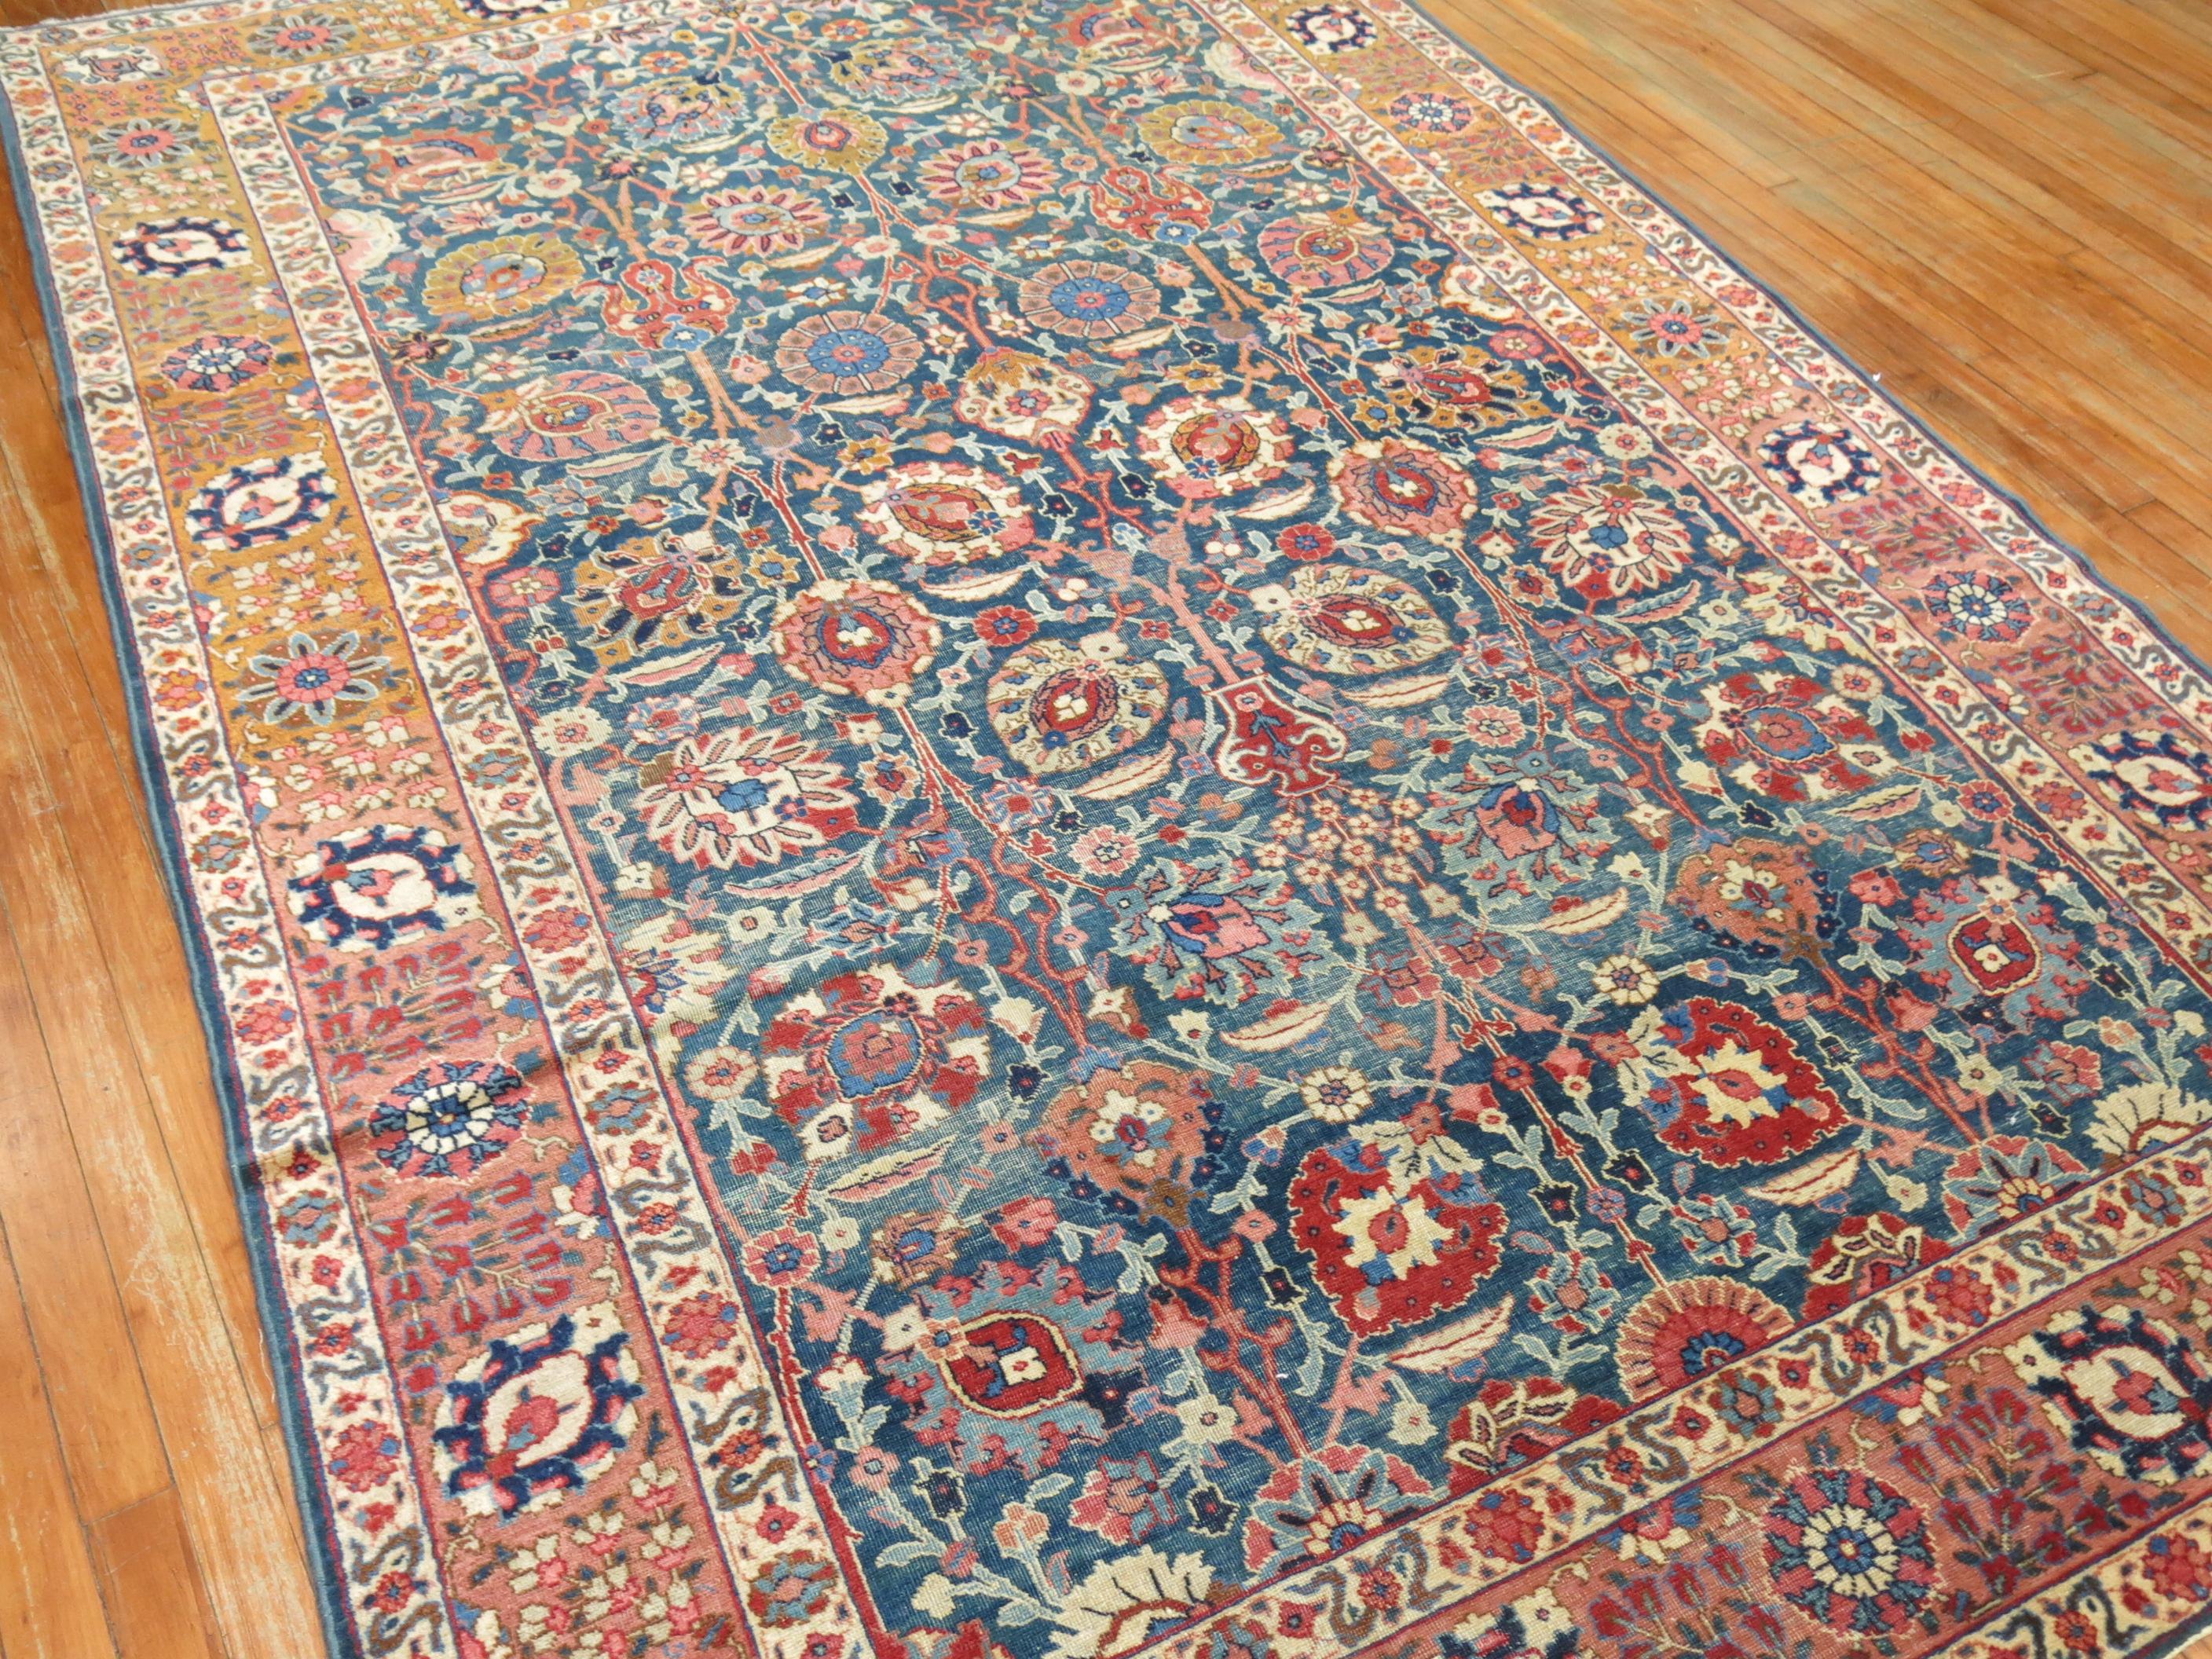 Classic all-over design Persian Tabriz rug with a green blue ground, pink dominant accents and brown border, circa 1940.

Measures: 6' x 9'3